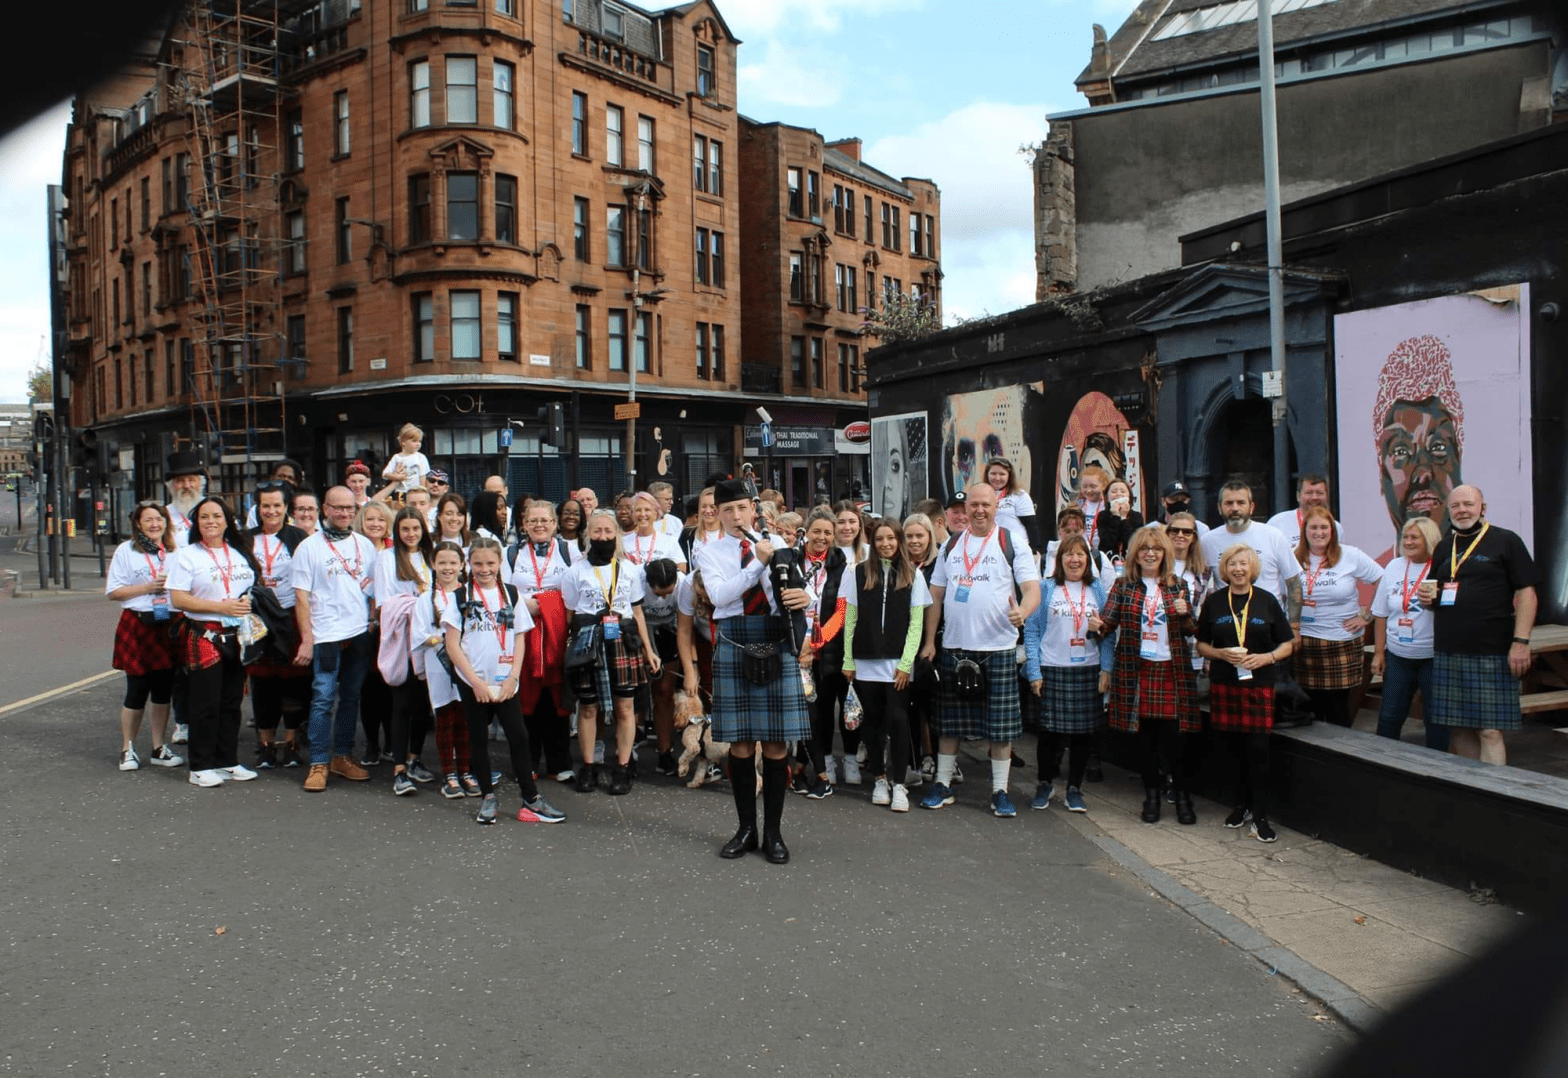 Why the Kiltwalk is a Great Team Building Exercise